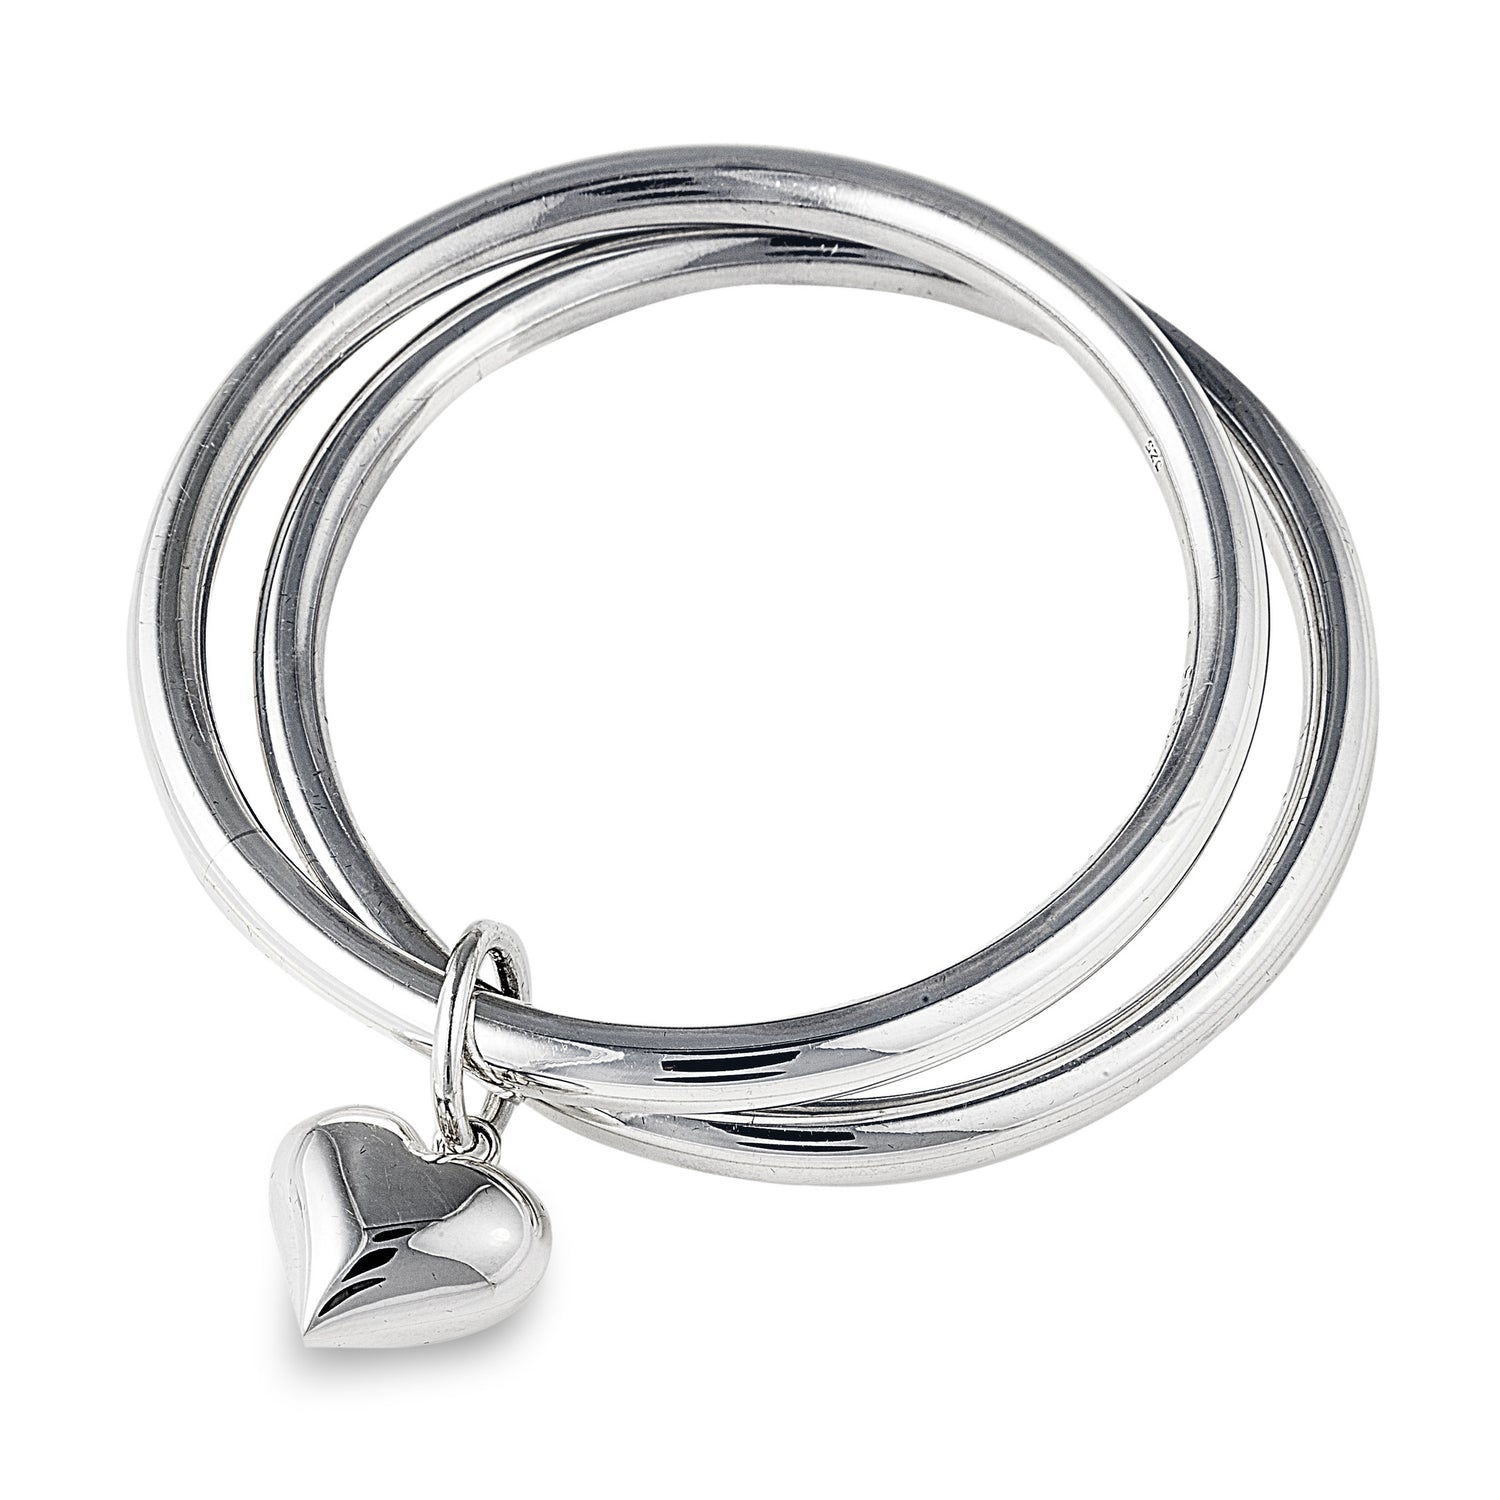 Eden Eclipse Bangle is made up of two single classic bangles in 925 sterling silver joined together with a band and featuring a heart charm. Approx 6.6cm in diameter. Small size available. Luxury jewellery at affordable prices by Bellagio & Co. Worldwide Shipping plus FREE shipping for orders over $150 in Australia. 